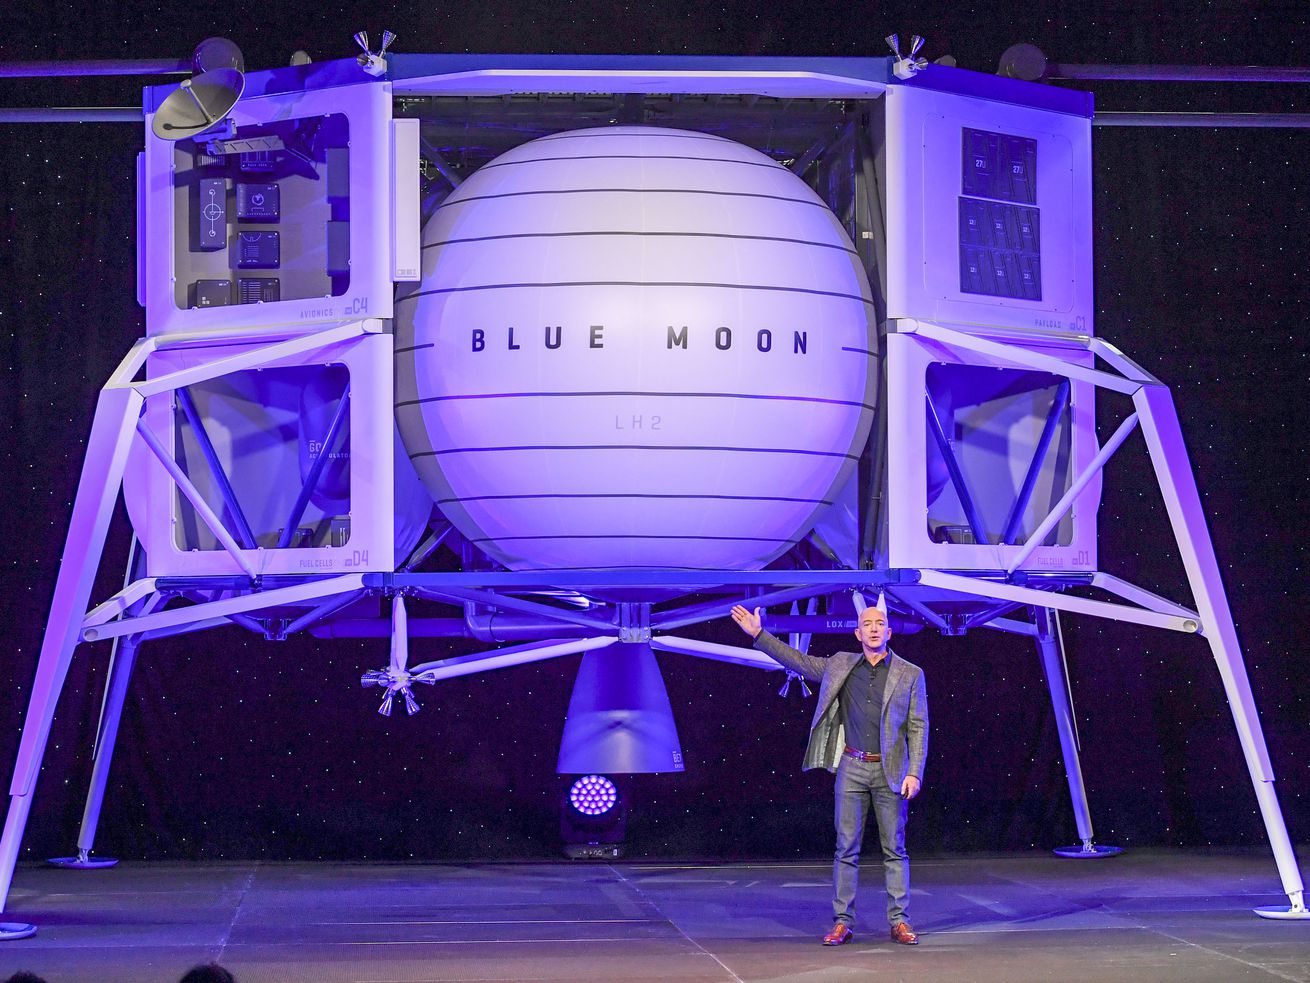 Jeff Bezos, founder of Amazon and Blue Origin, stands in front of the newly developed lunar lander “Blue Moon” at the Walter E. Washington Convention Center.